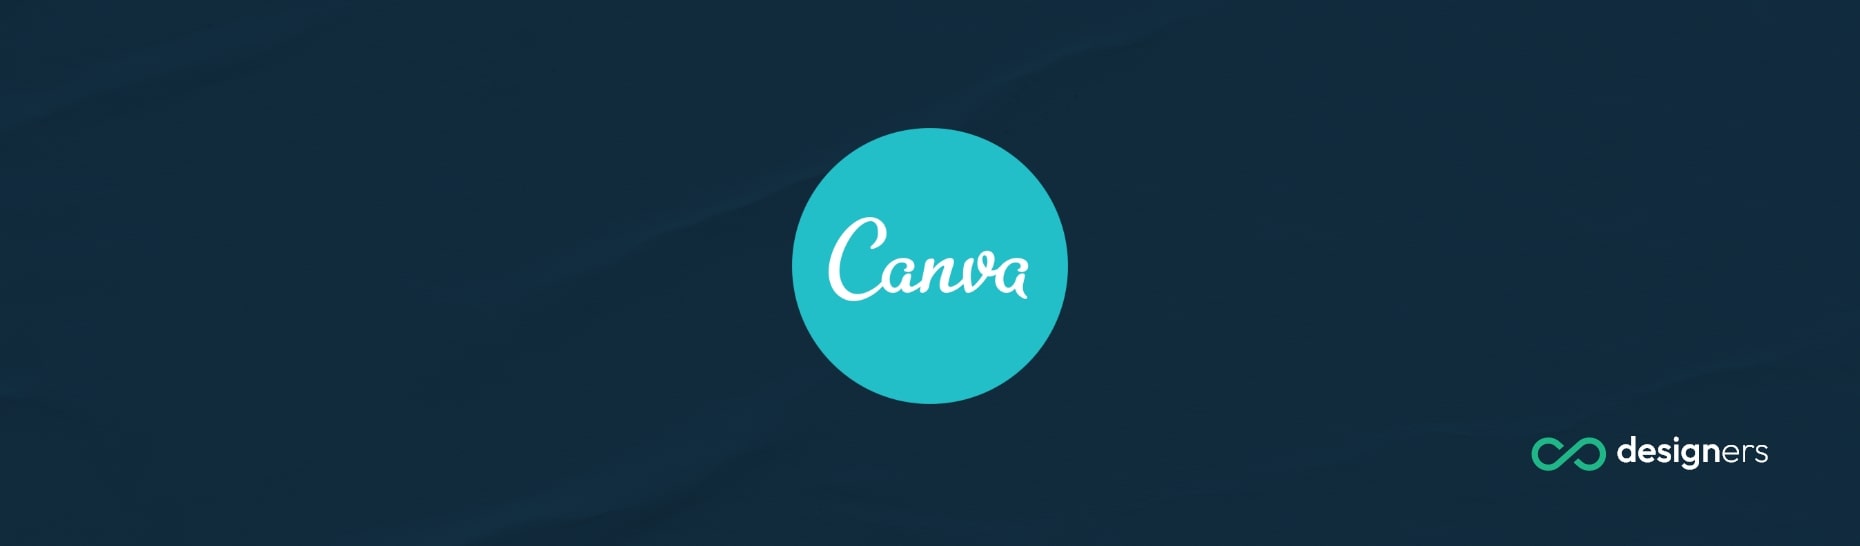 What Size Is a PowerPoint Slide in Canva?